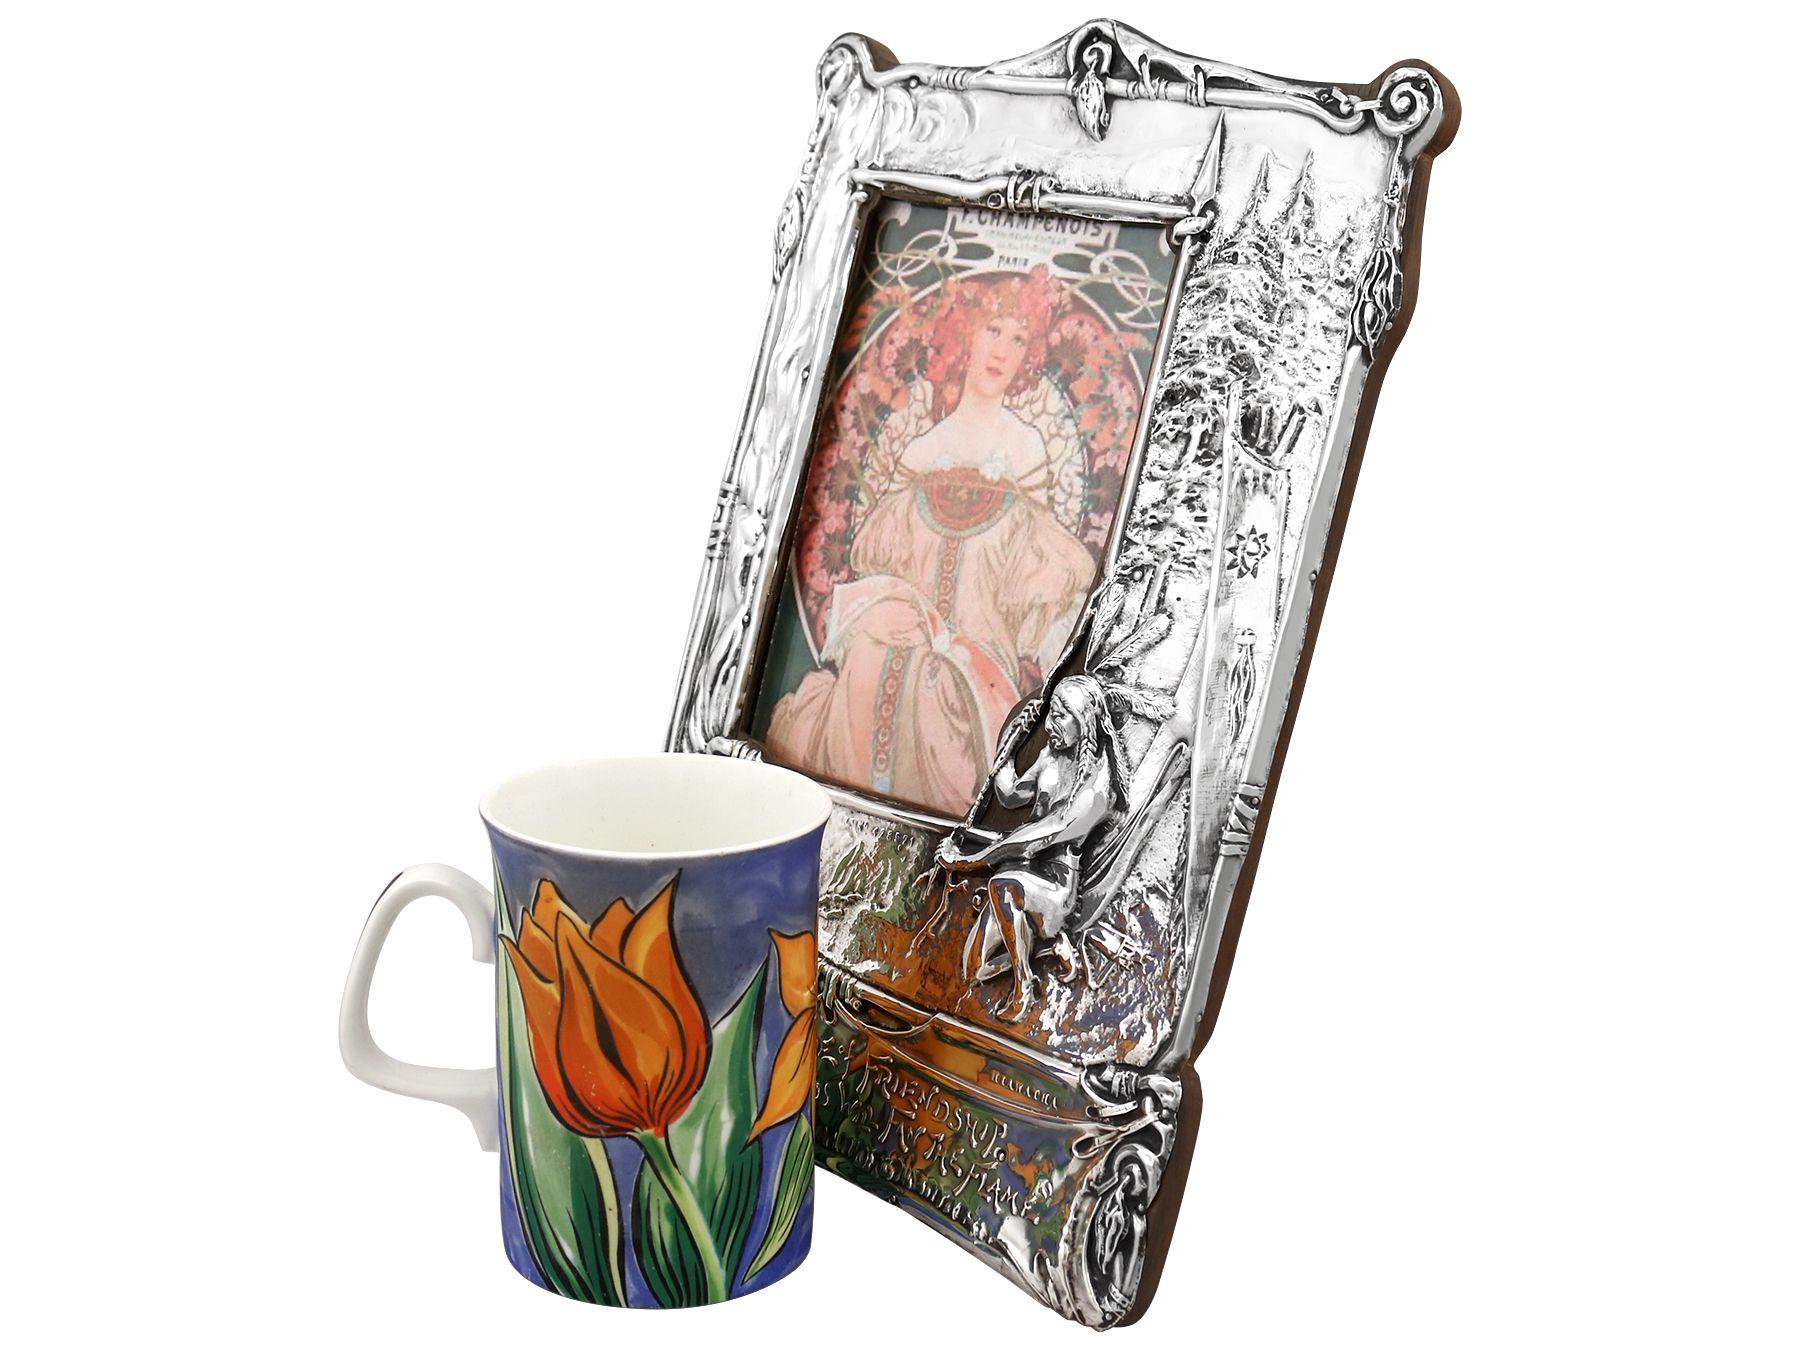 An exceptional, fine and impressive antique Edwardian English sterling silver photograph frame in the Art Nouveau style; an addition to our silverware collection

This exceptional, fine and impressive antique Edwardian sterling silver photograph